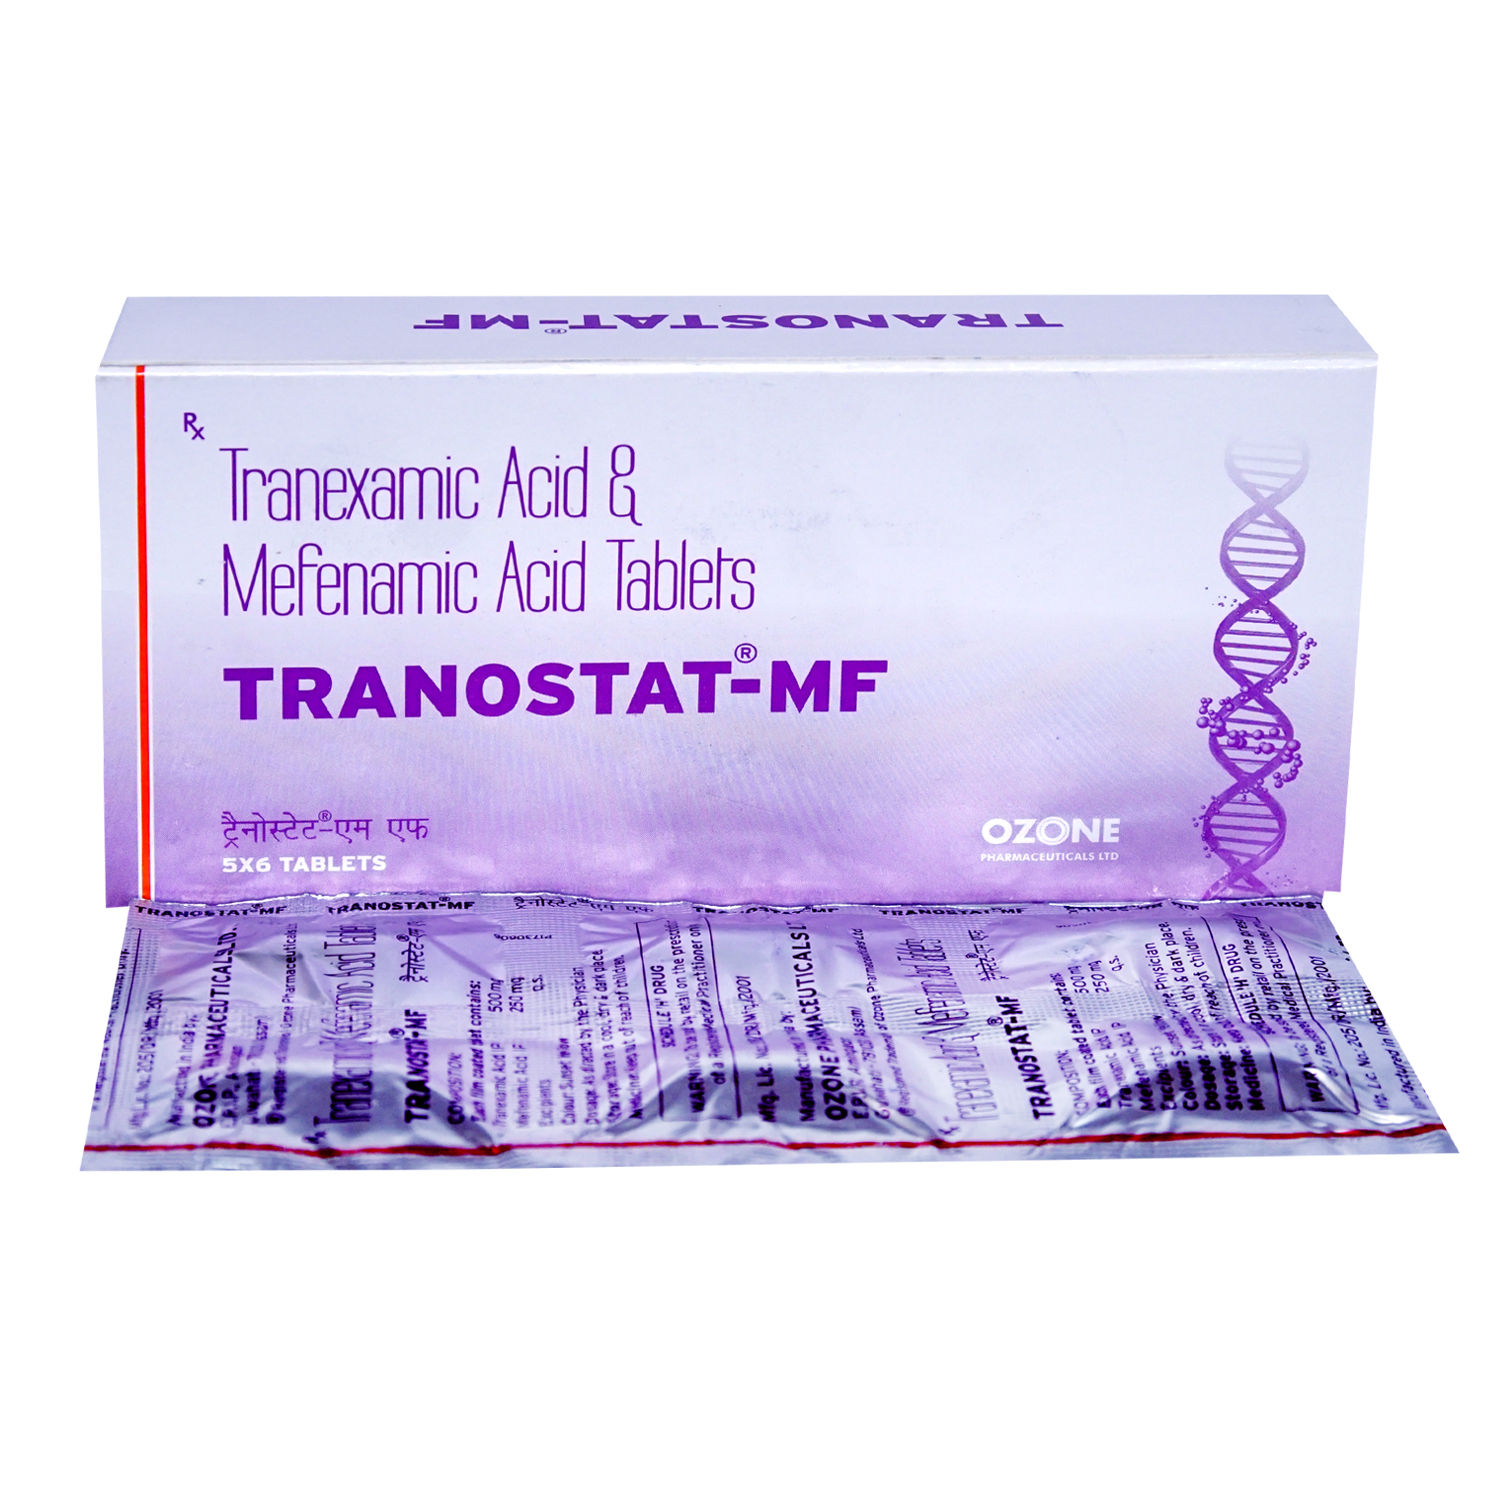 Tranostat Mf Tablet Price Uses Side Effects Composition Apollo Pharmacy